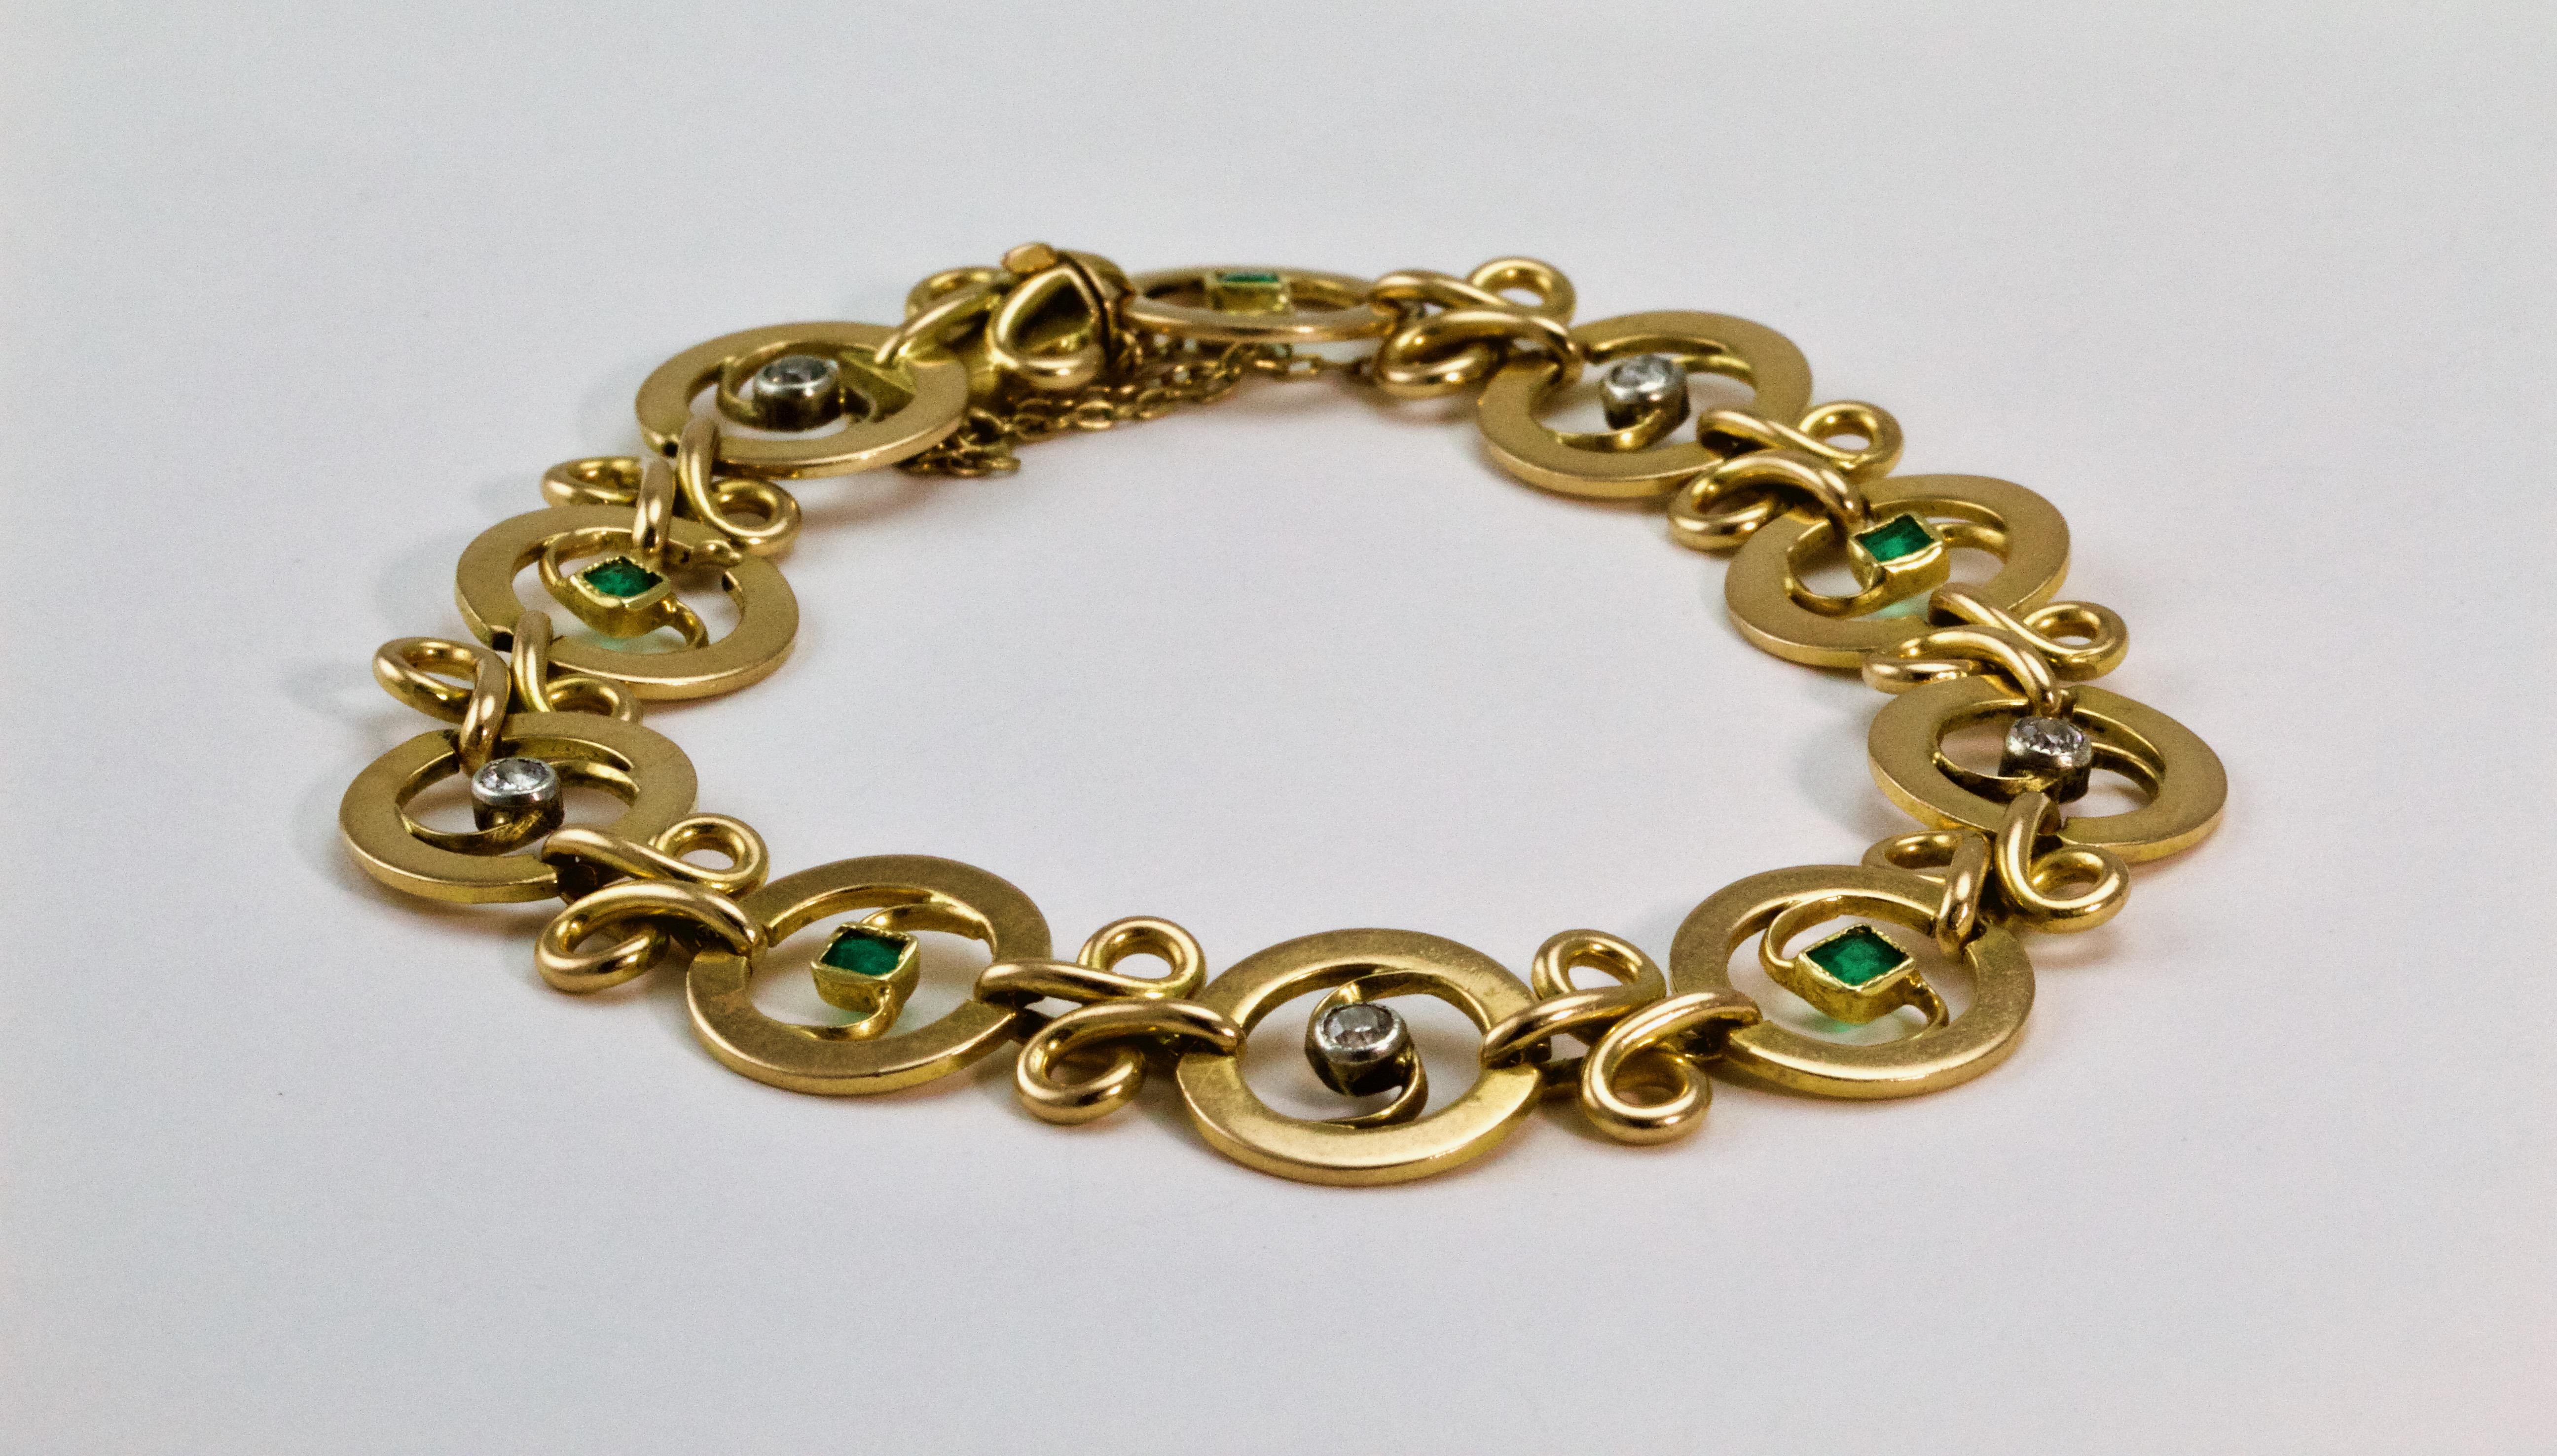 French Art-Nouveau 18 carat yellow gold bracelet, circa 1910. This stunning bracelet is composed of 10 openwork circular shaped links each showcasing alternating diamonds and emeralds. They are linked by small gold ties. 
Length: approx 8 Inches